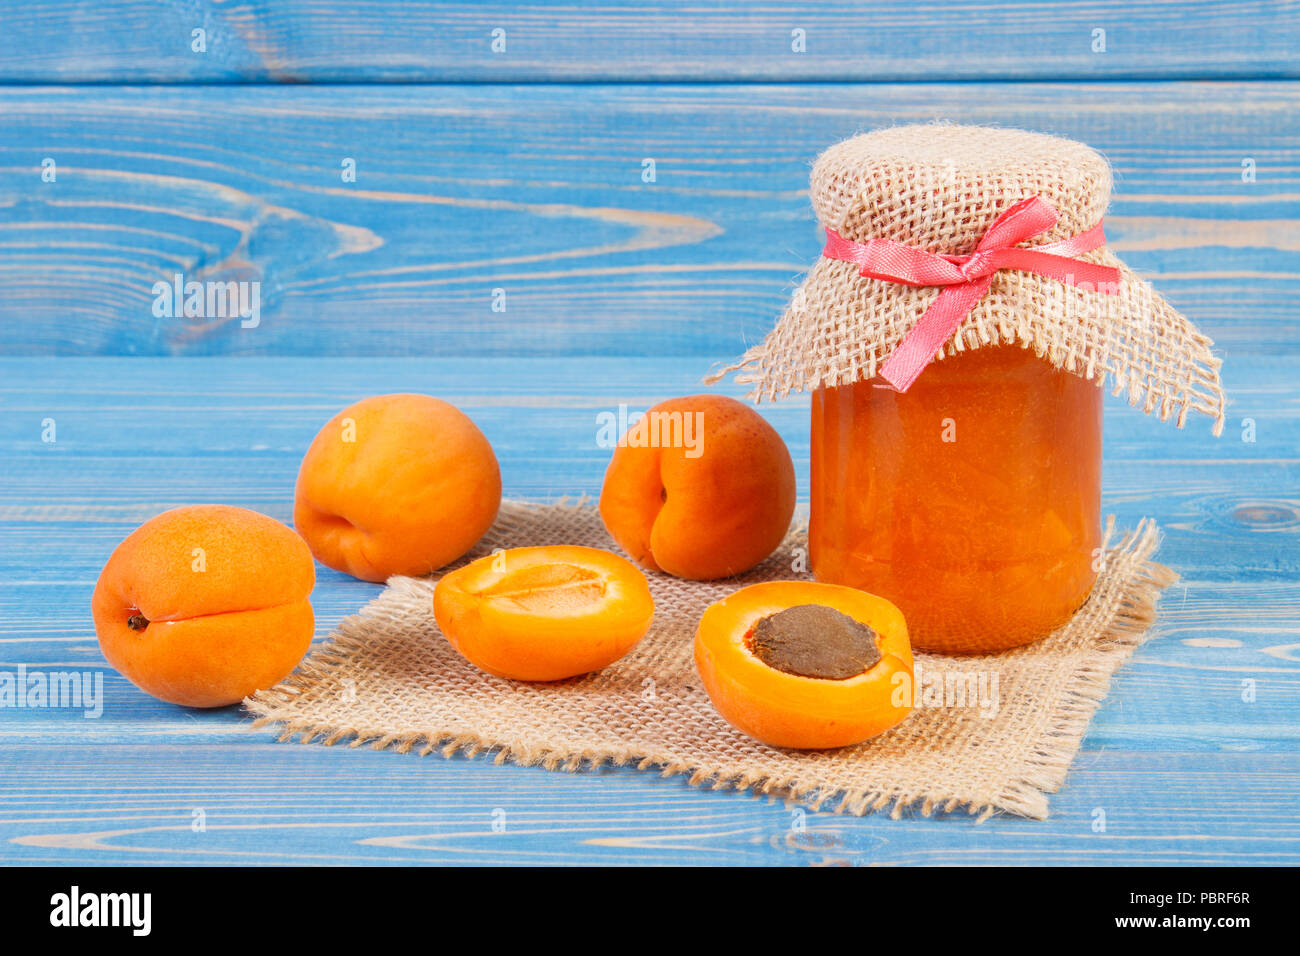 Fresh homemade apricot marmalade in jar and ripe fruits on blue boards, concept of healthy sweet dessert Stock Photo